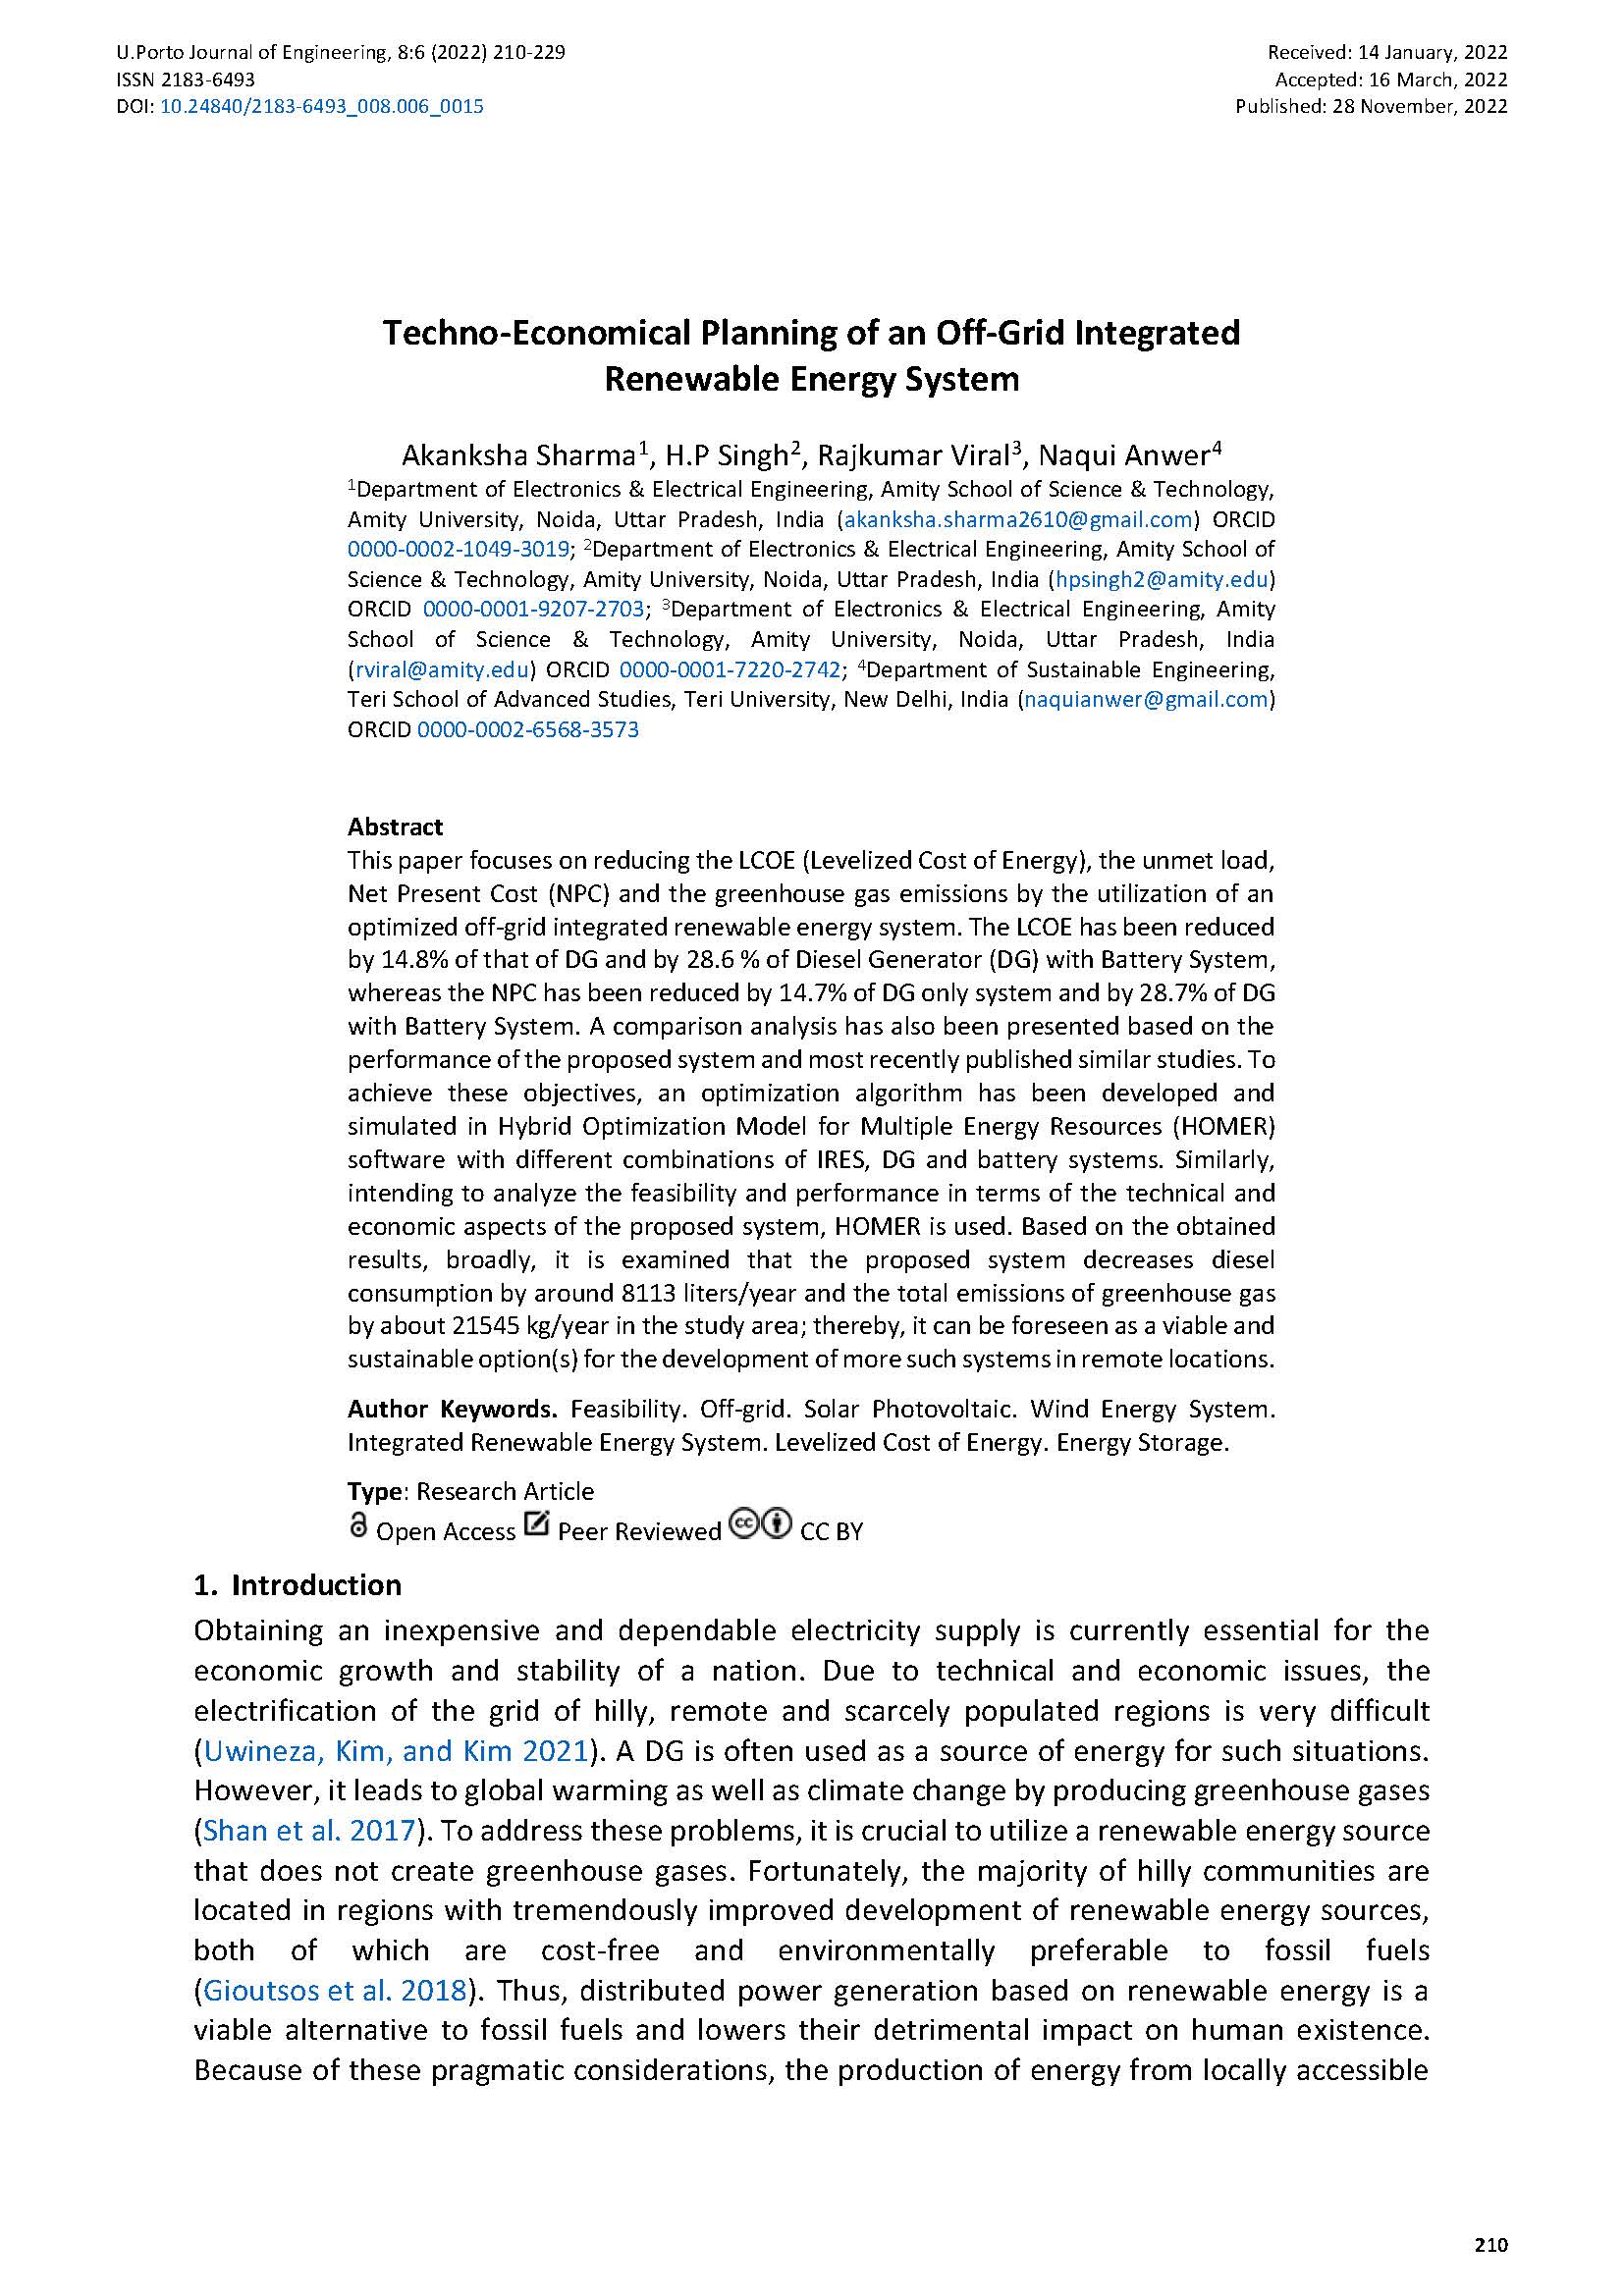 Techno-Economical Planning of an Off-Grid Integrated Renewable Energy System